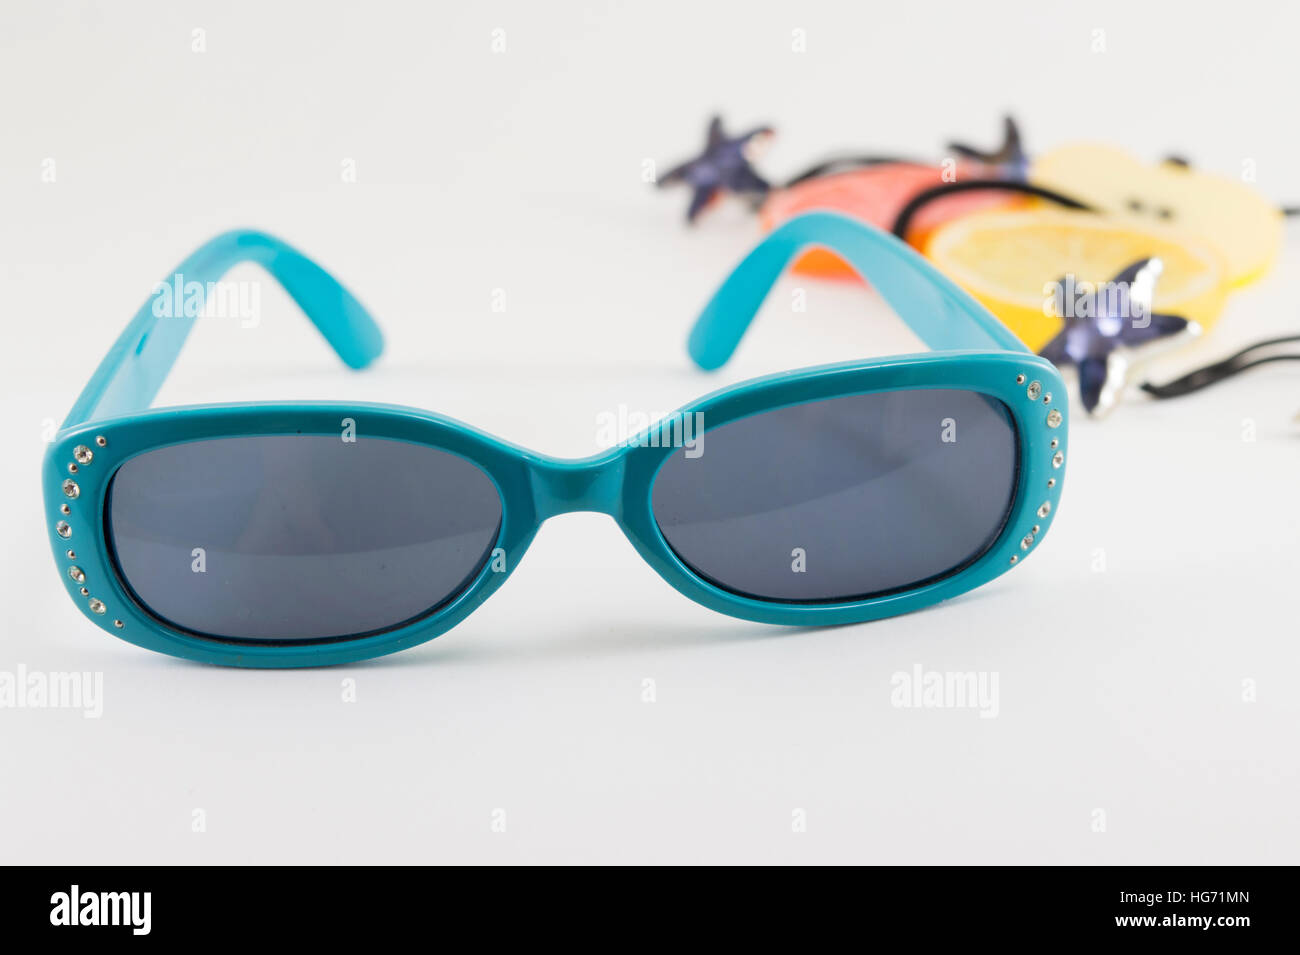 Blue small children sunglasses and accessories on white background Stock Photo